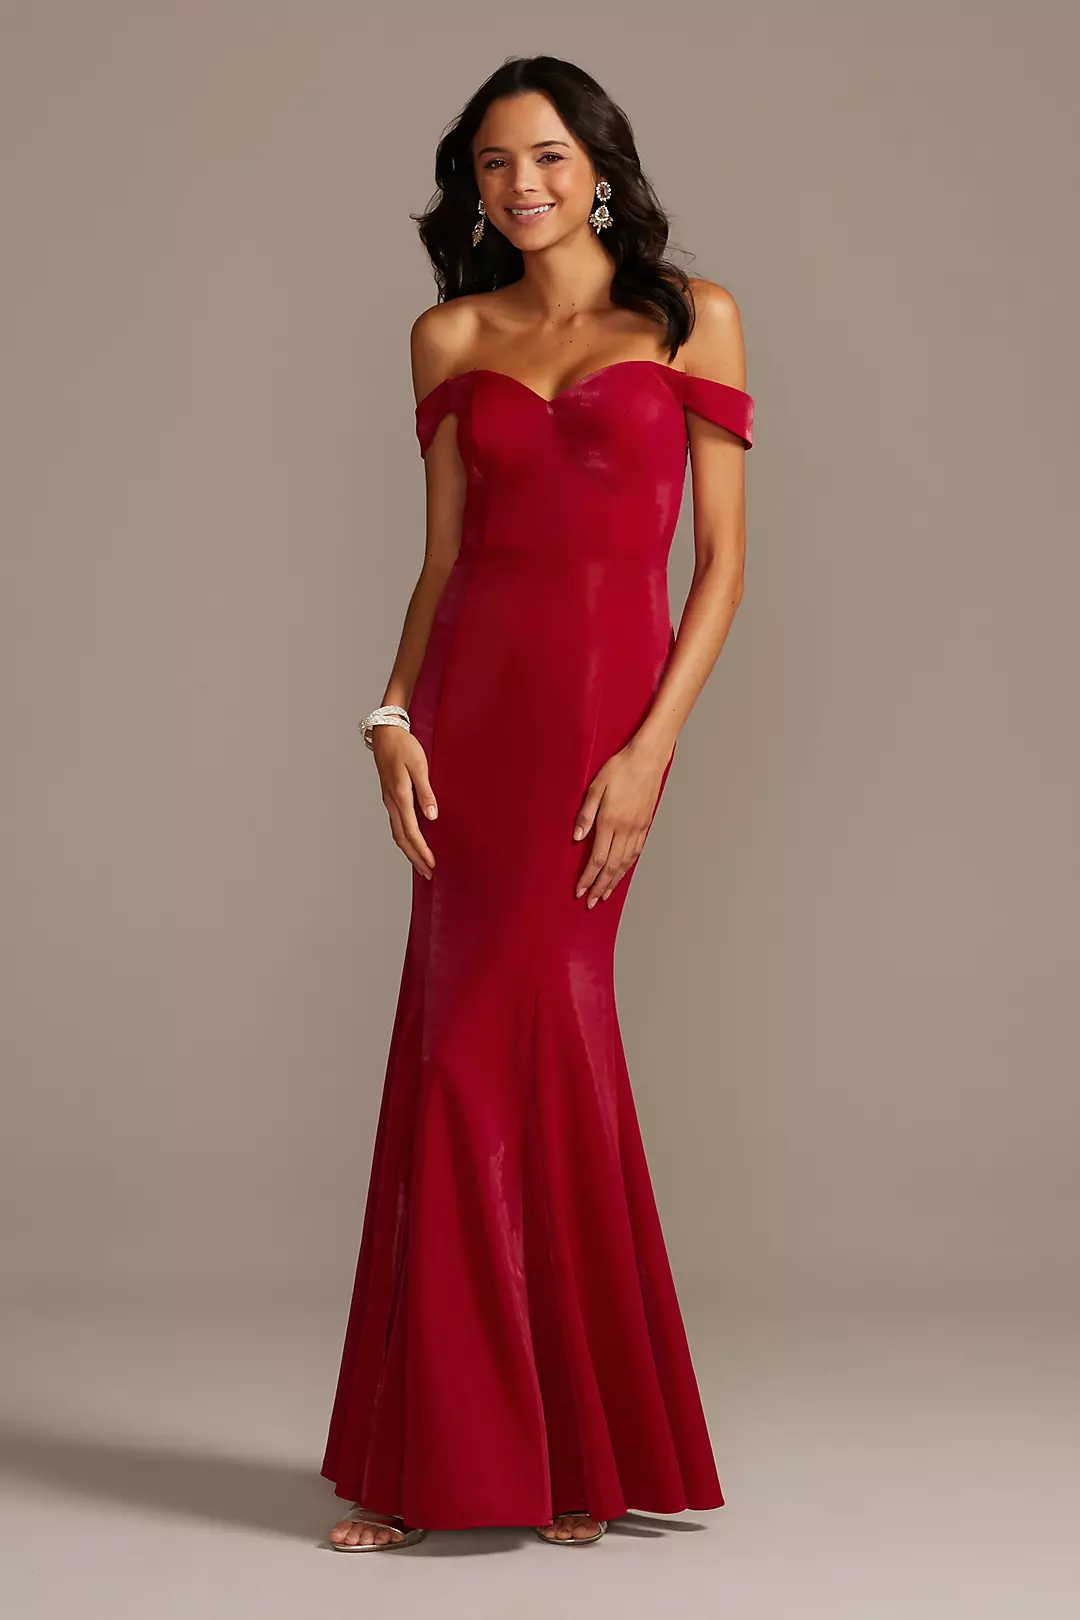 Shiny Off the Shoulder Mermaid Gown with Bow Back Image